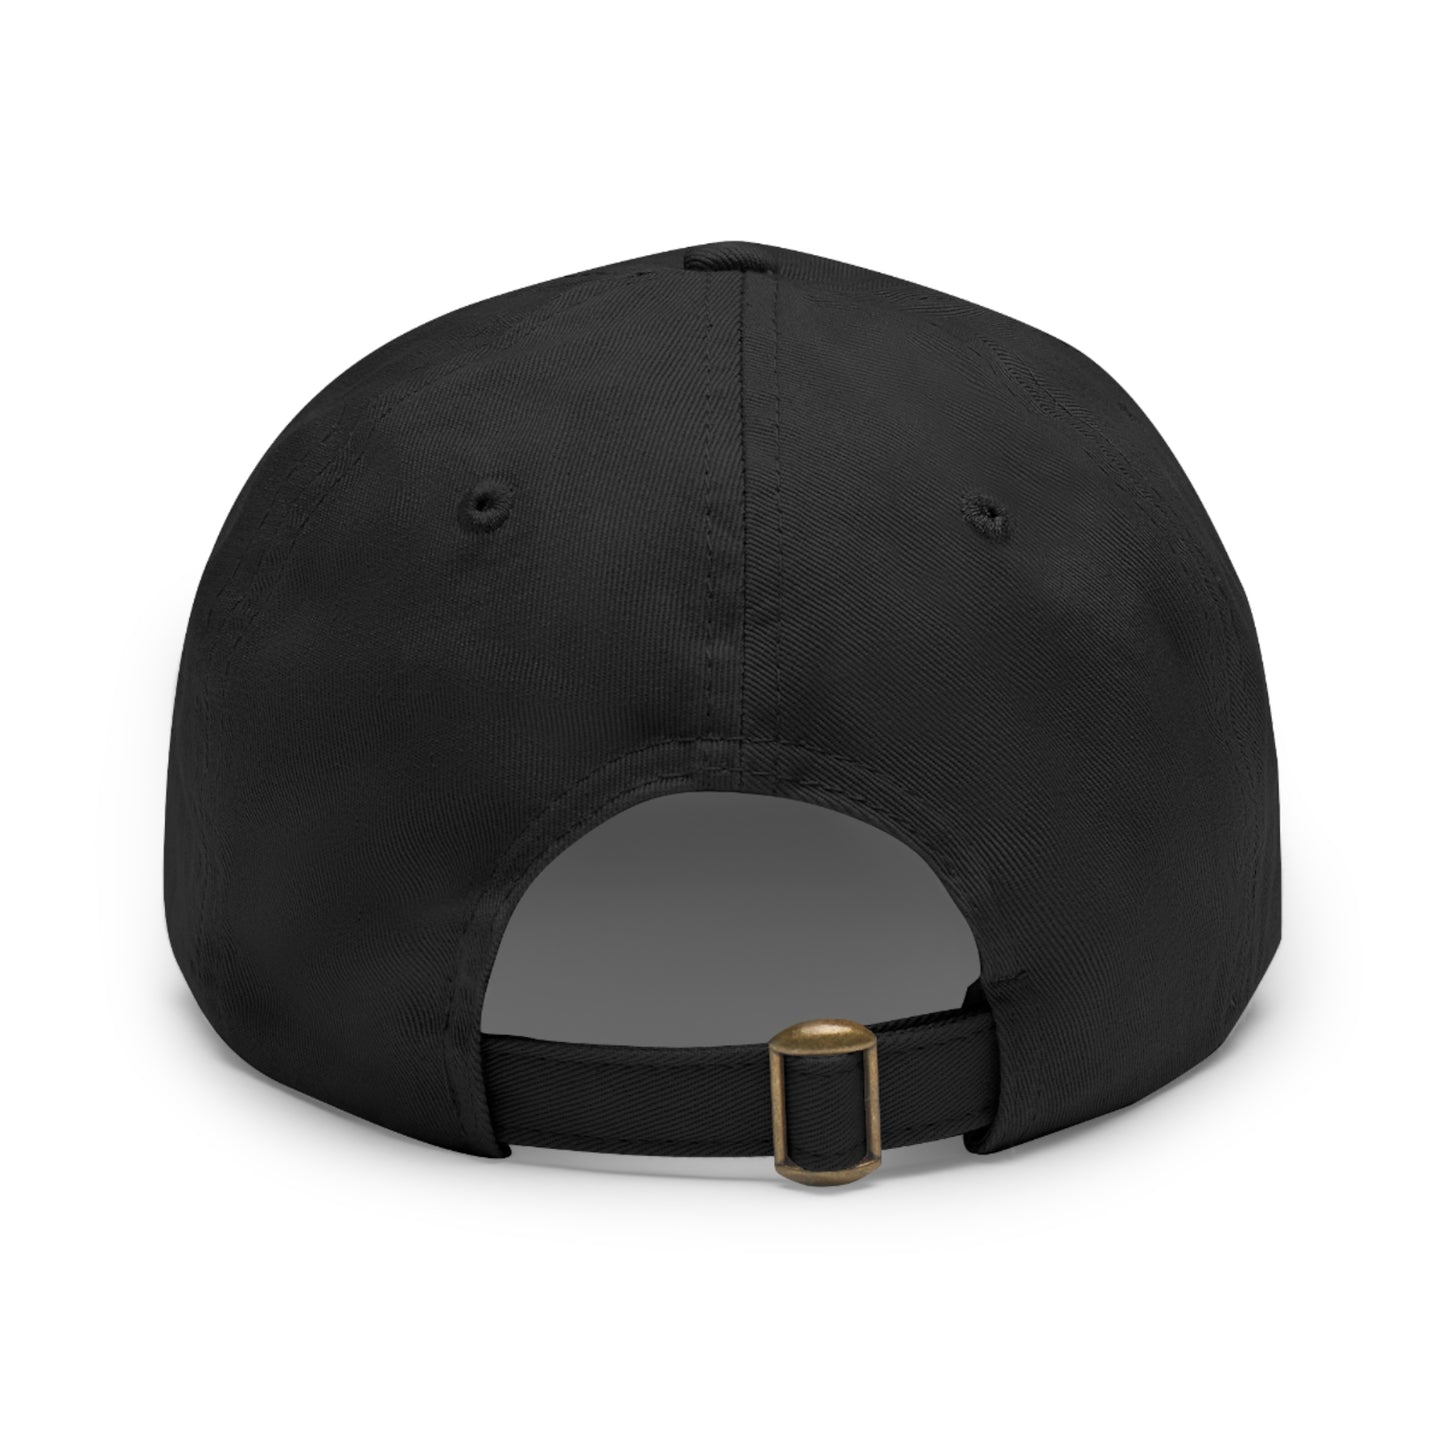 Dad Hat with Leather Patch (Rectangle) "Smiley Face with Glasses"